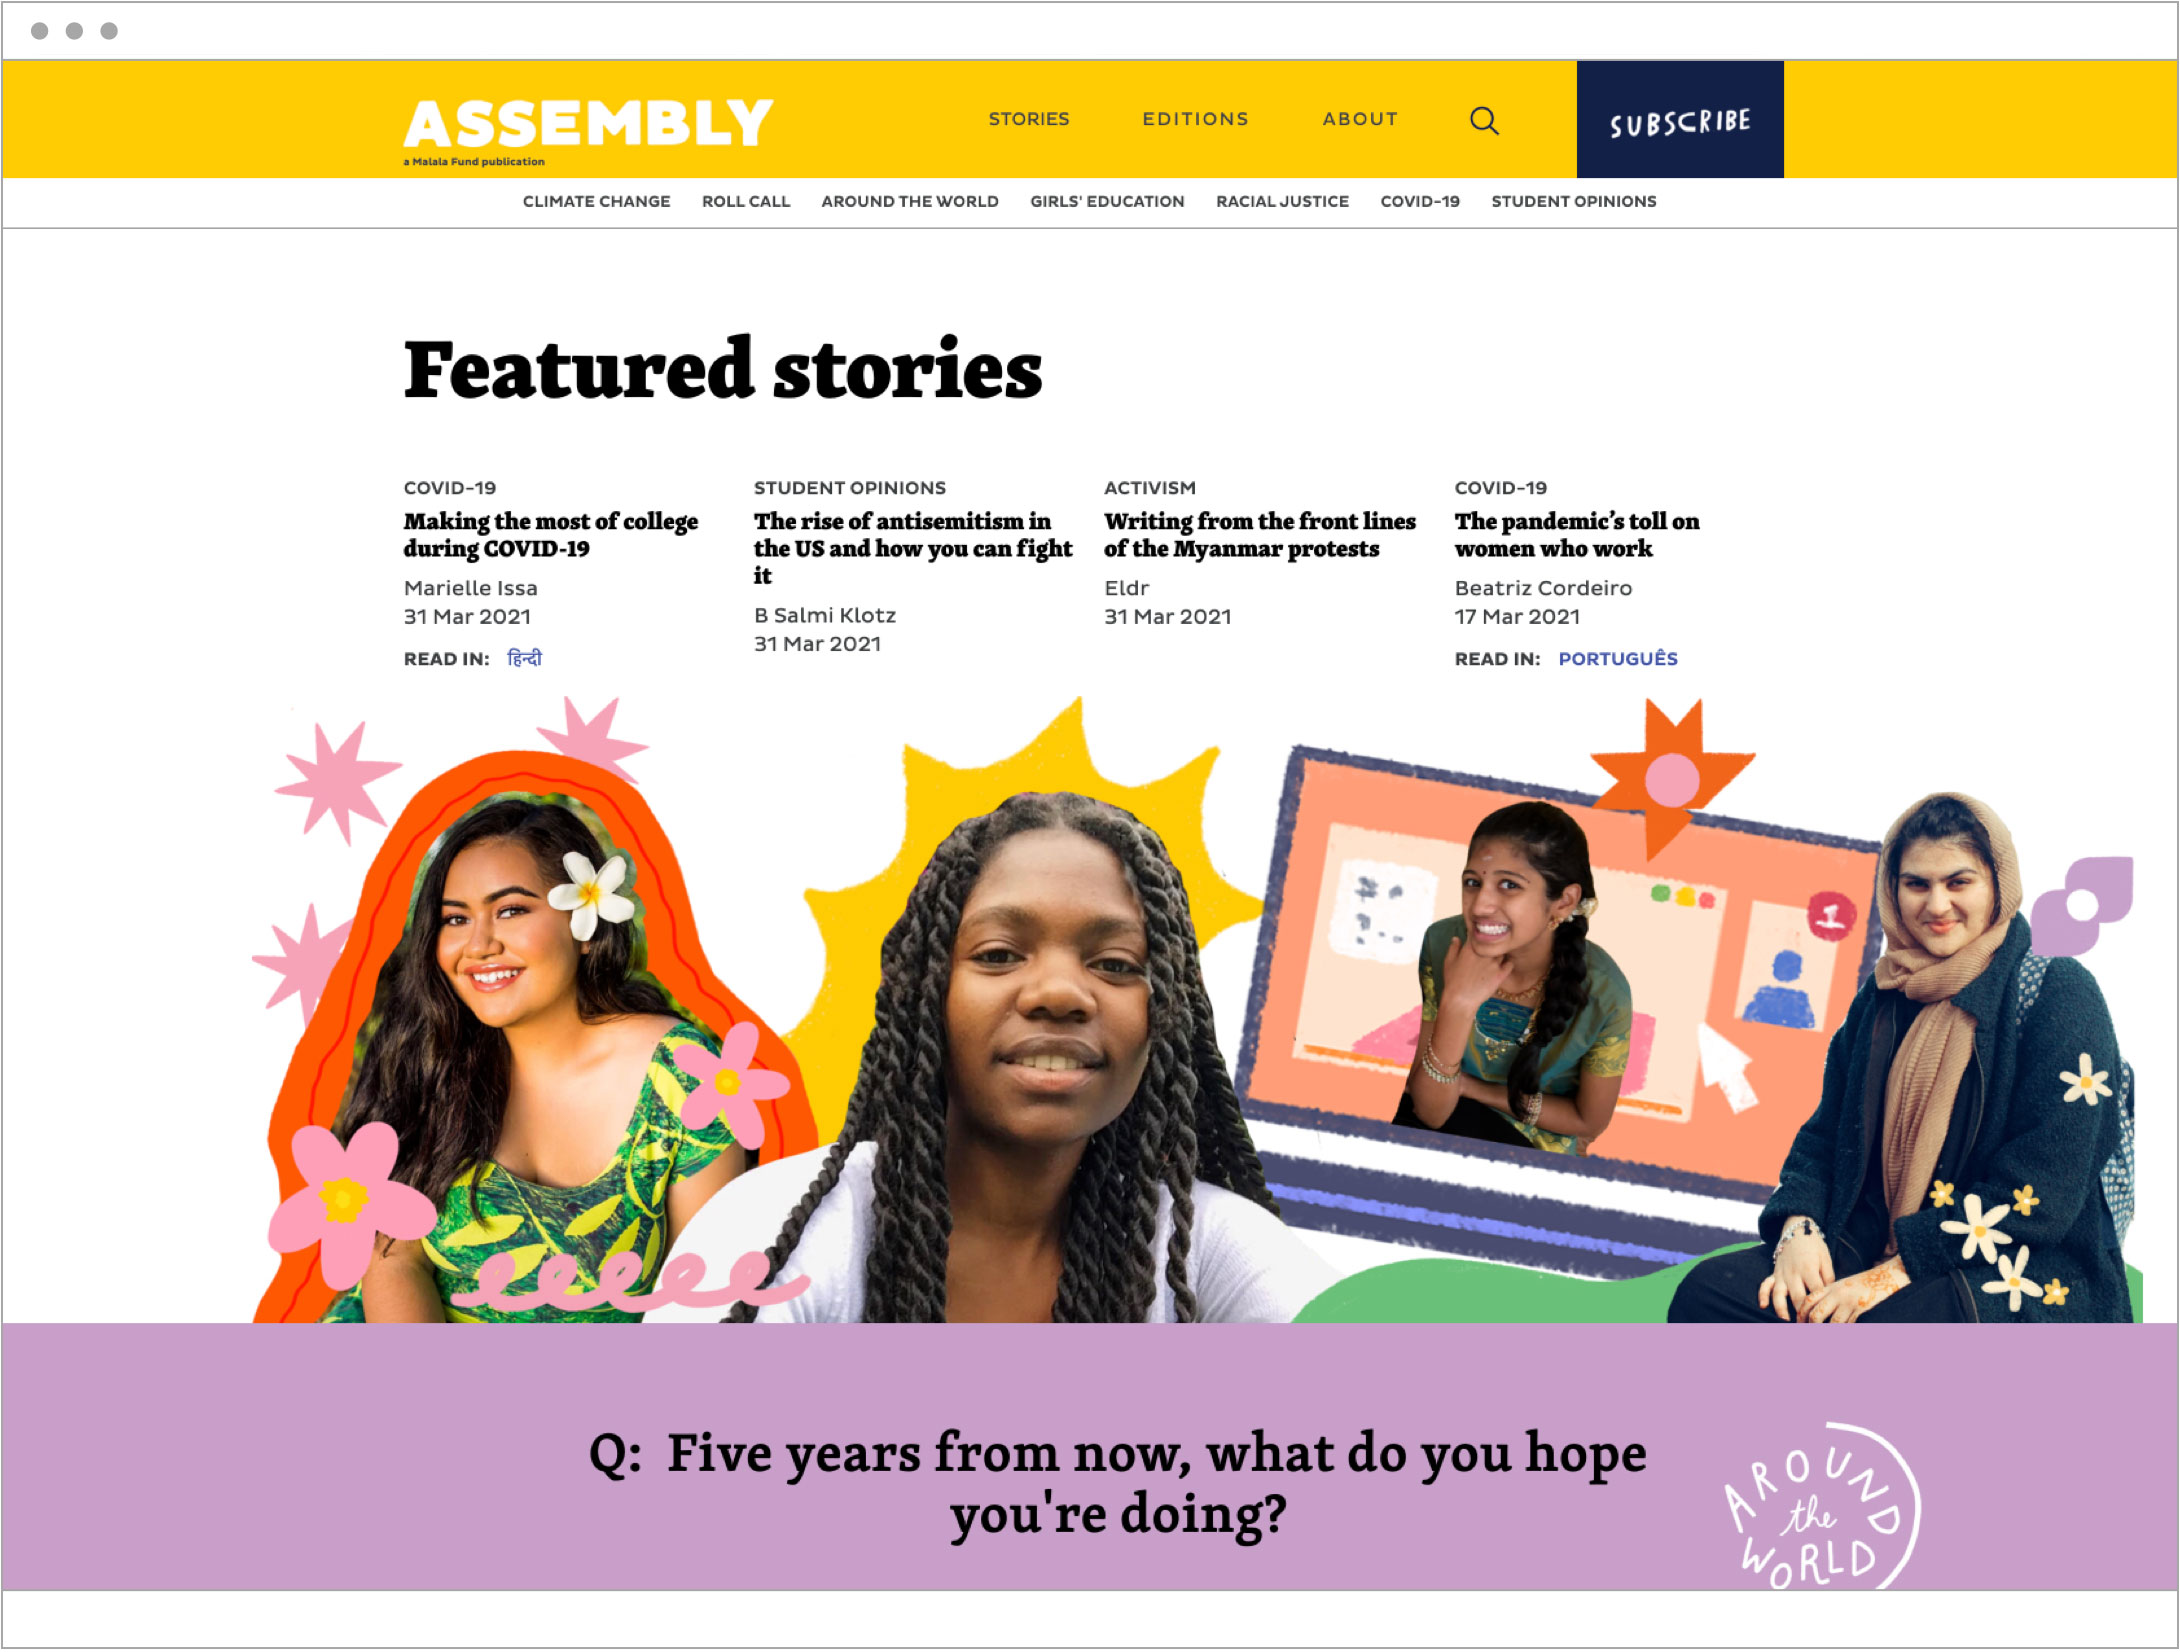 Malala Fund's Assembly homepage with 4 girls and featured stories: COVID-19, student opinions, and activism. Question reads. Five years from now, what do you hope you're doing?